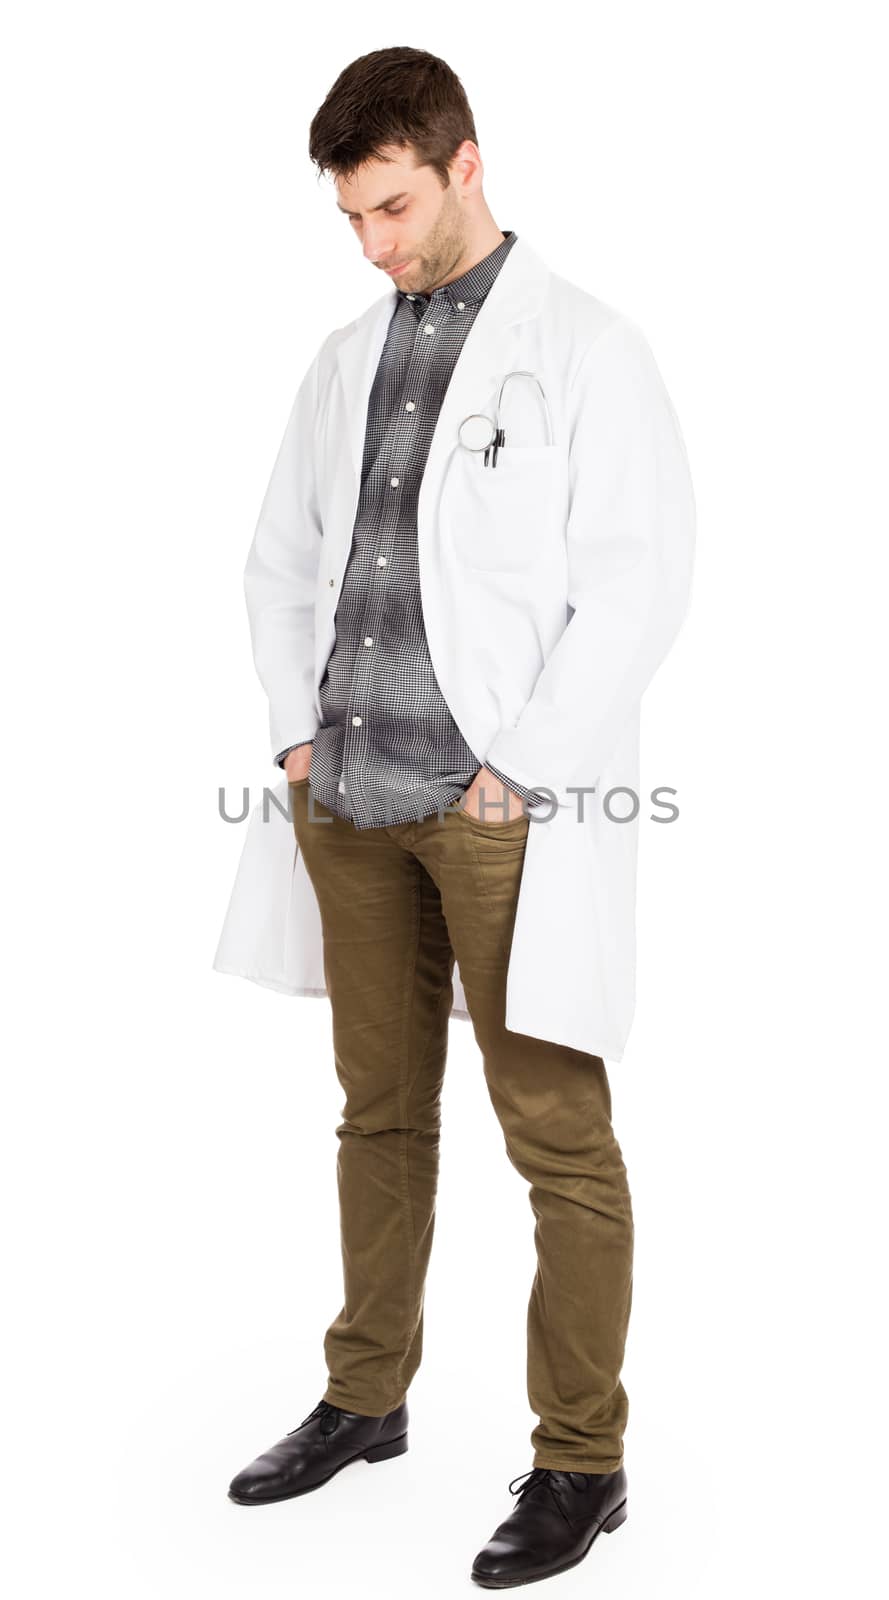 Male doctor, concept of healthcare and medicine by michaklootwijk